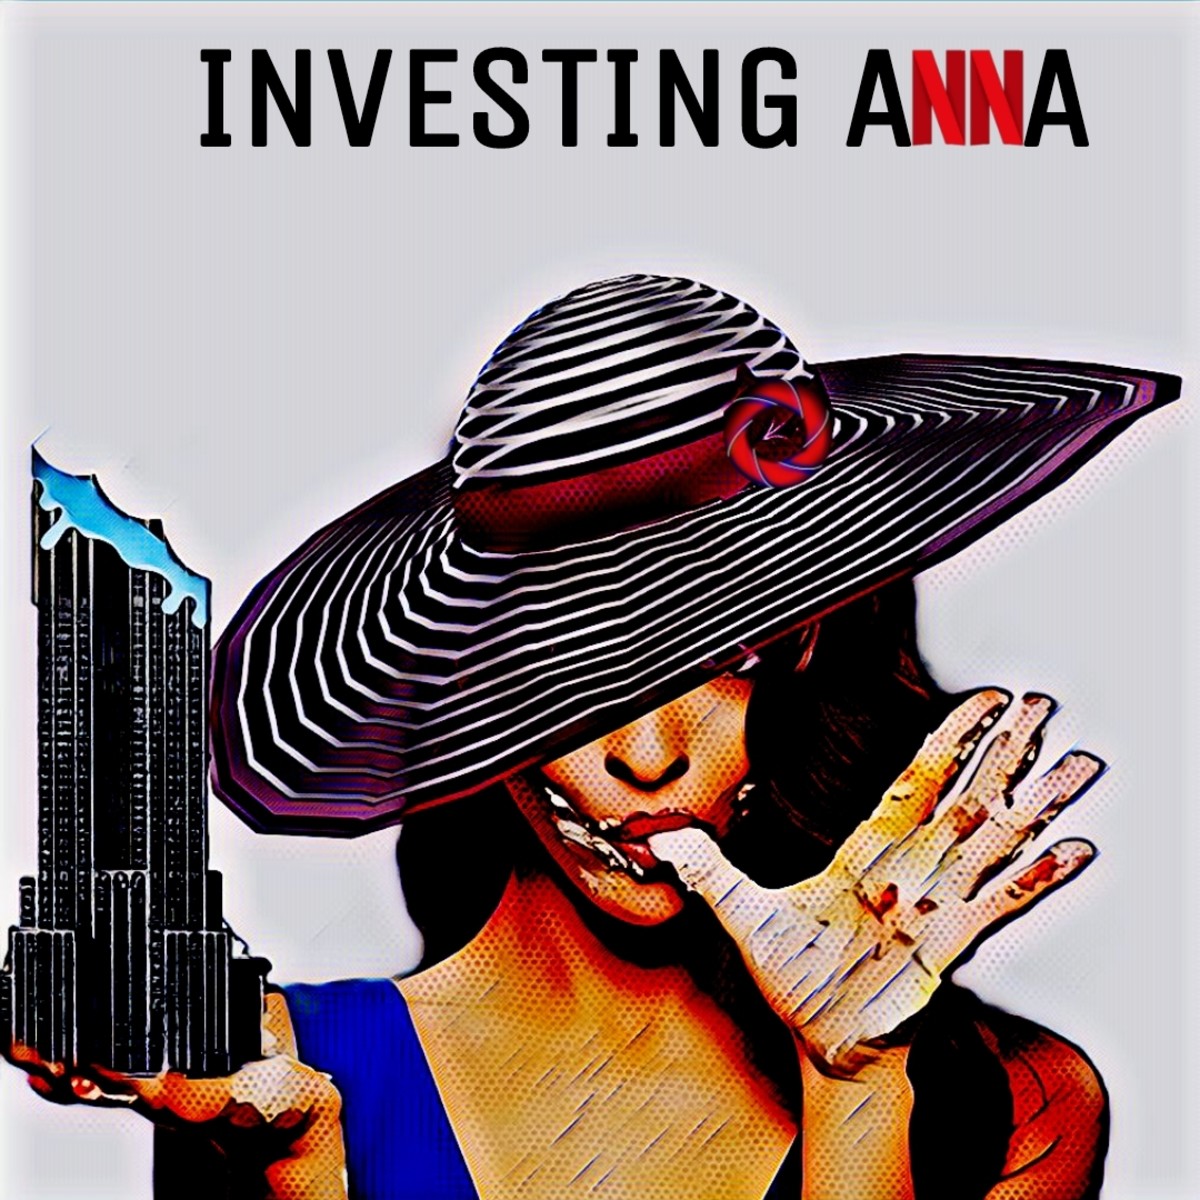 “Investing Anna”: Netflix Promotes a Con and It's Not Comic